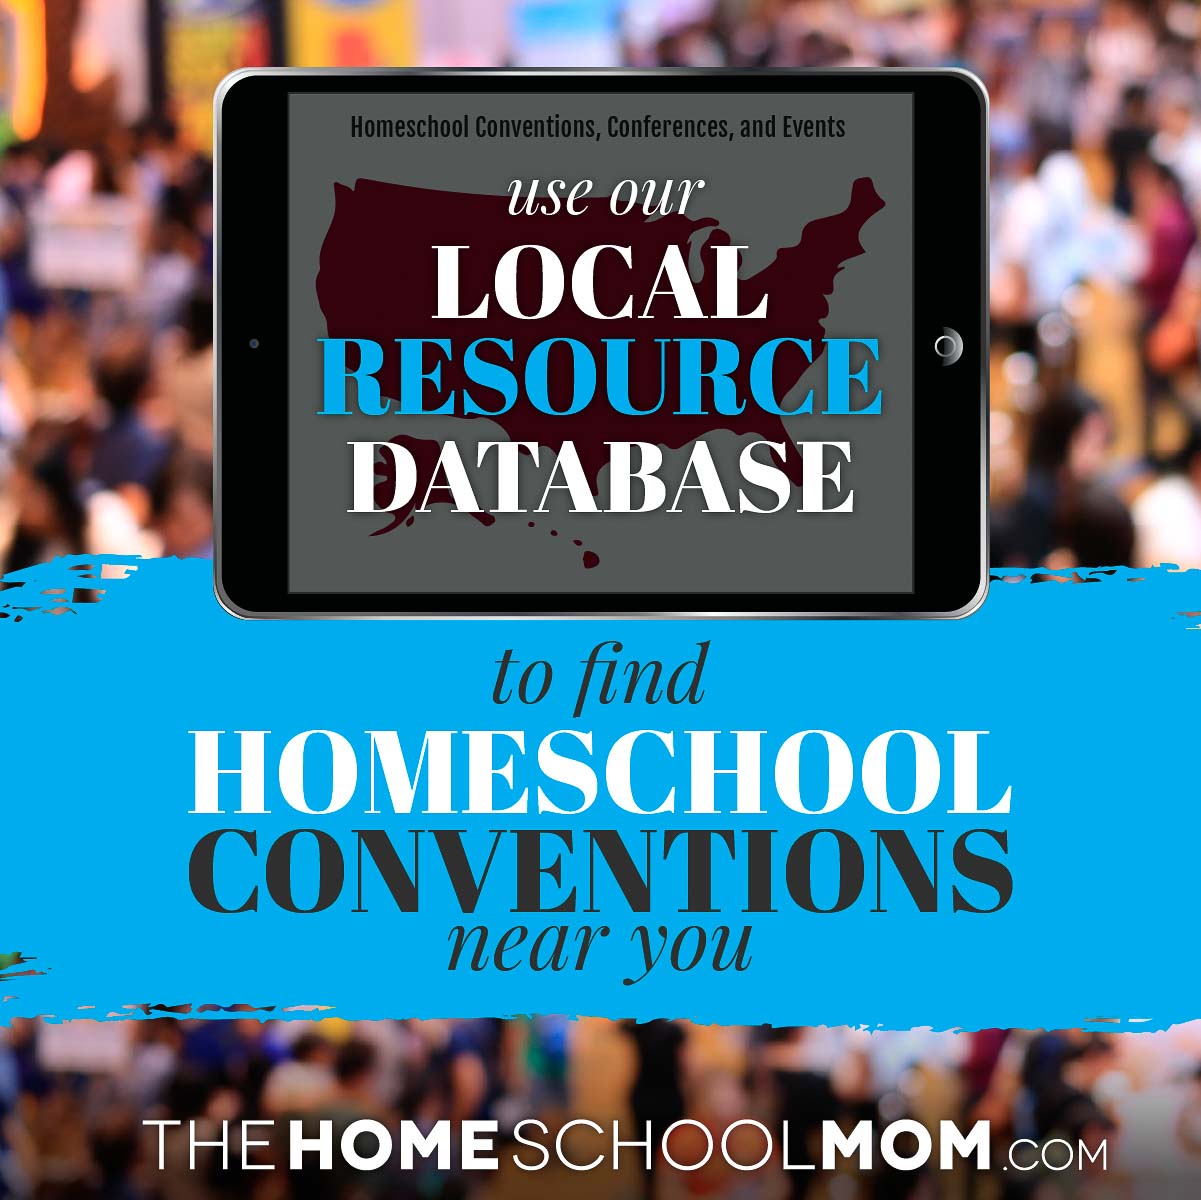 Use our local resource database to find homeschool conventions near you